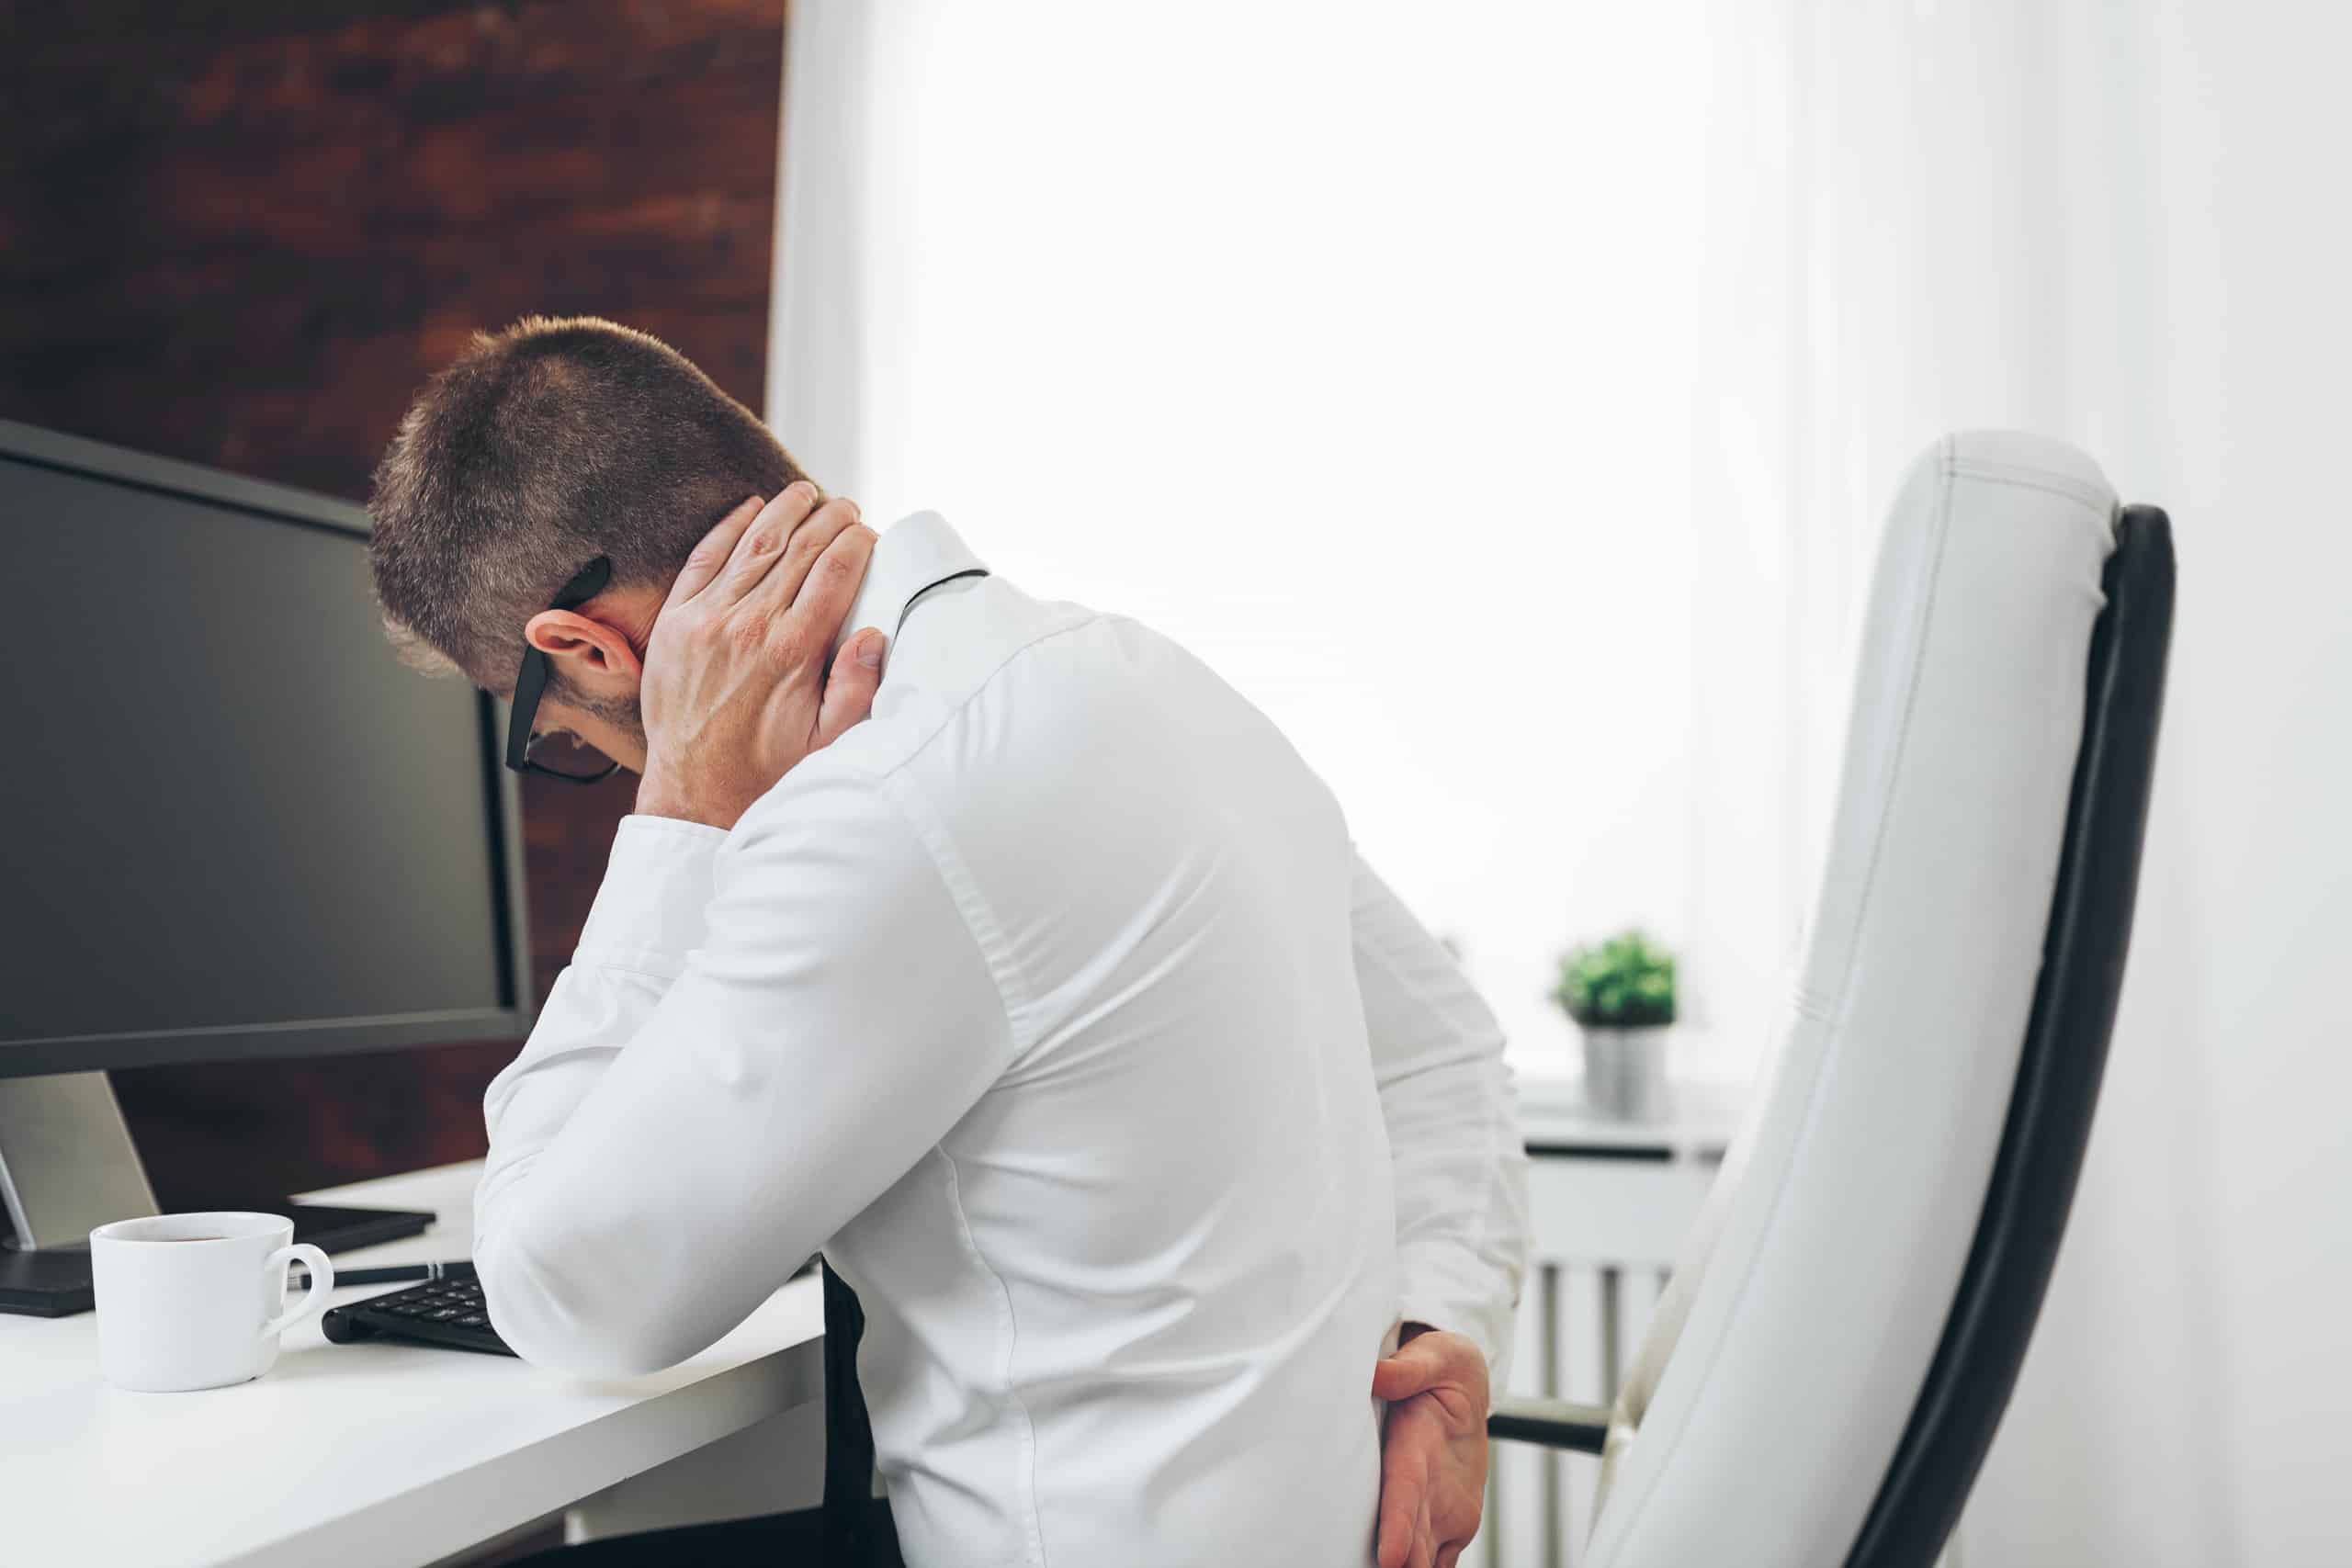 The Science Behind Ergonomic Office Chairs and Back Pain